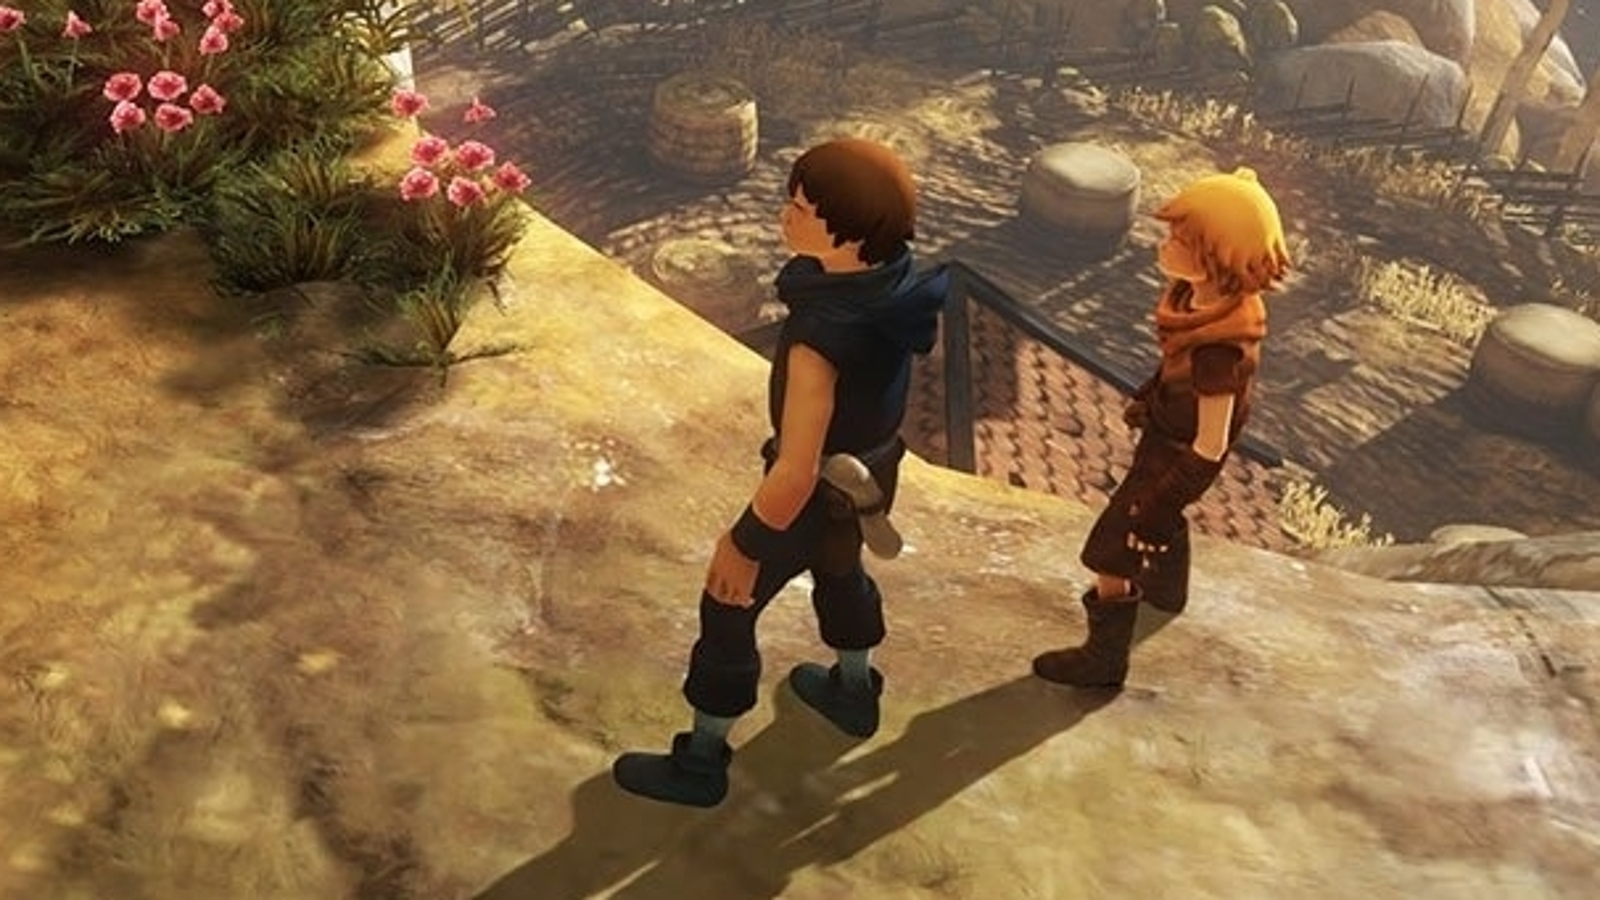 Brothers two sons на двоих. Brothers a Tale of two sons ps4. Brothers a Tale of two sons ps3. Brothers a Tale of two sons системные требования. Brothers: a Tale of two sons Грифон.